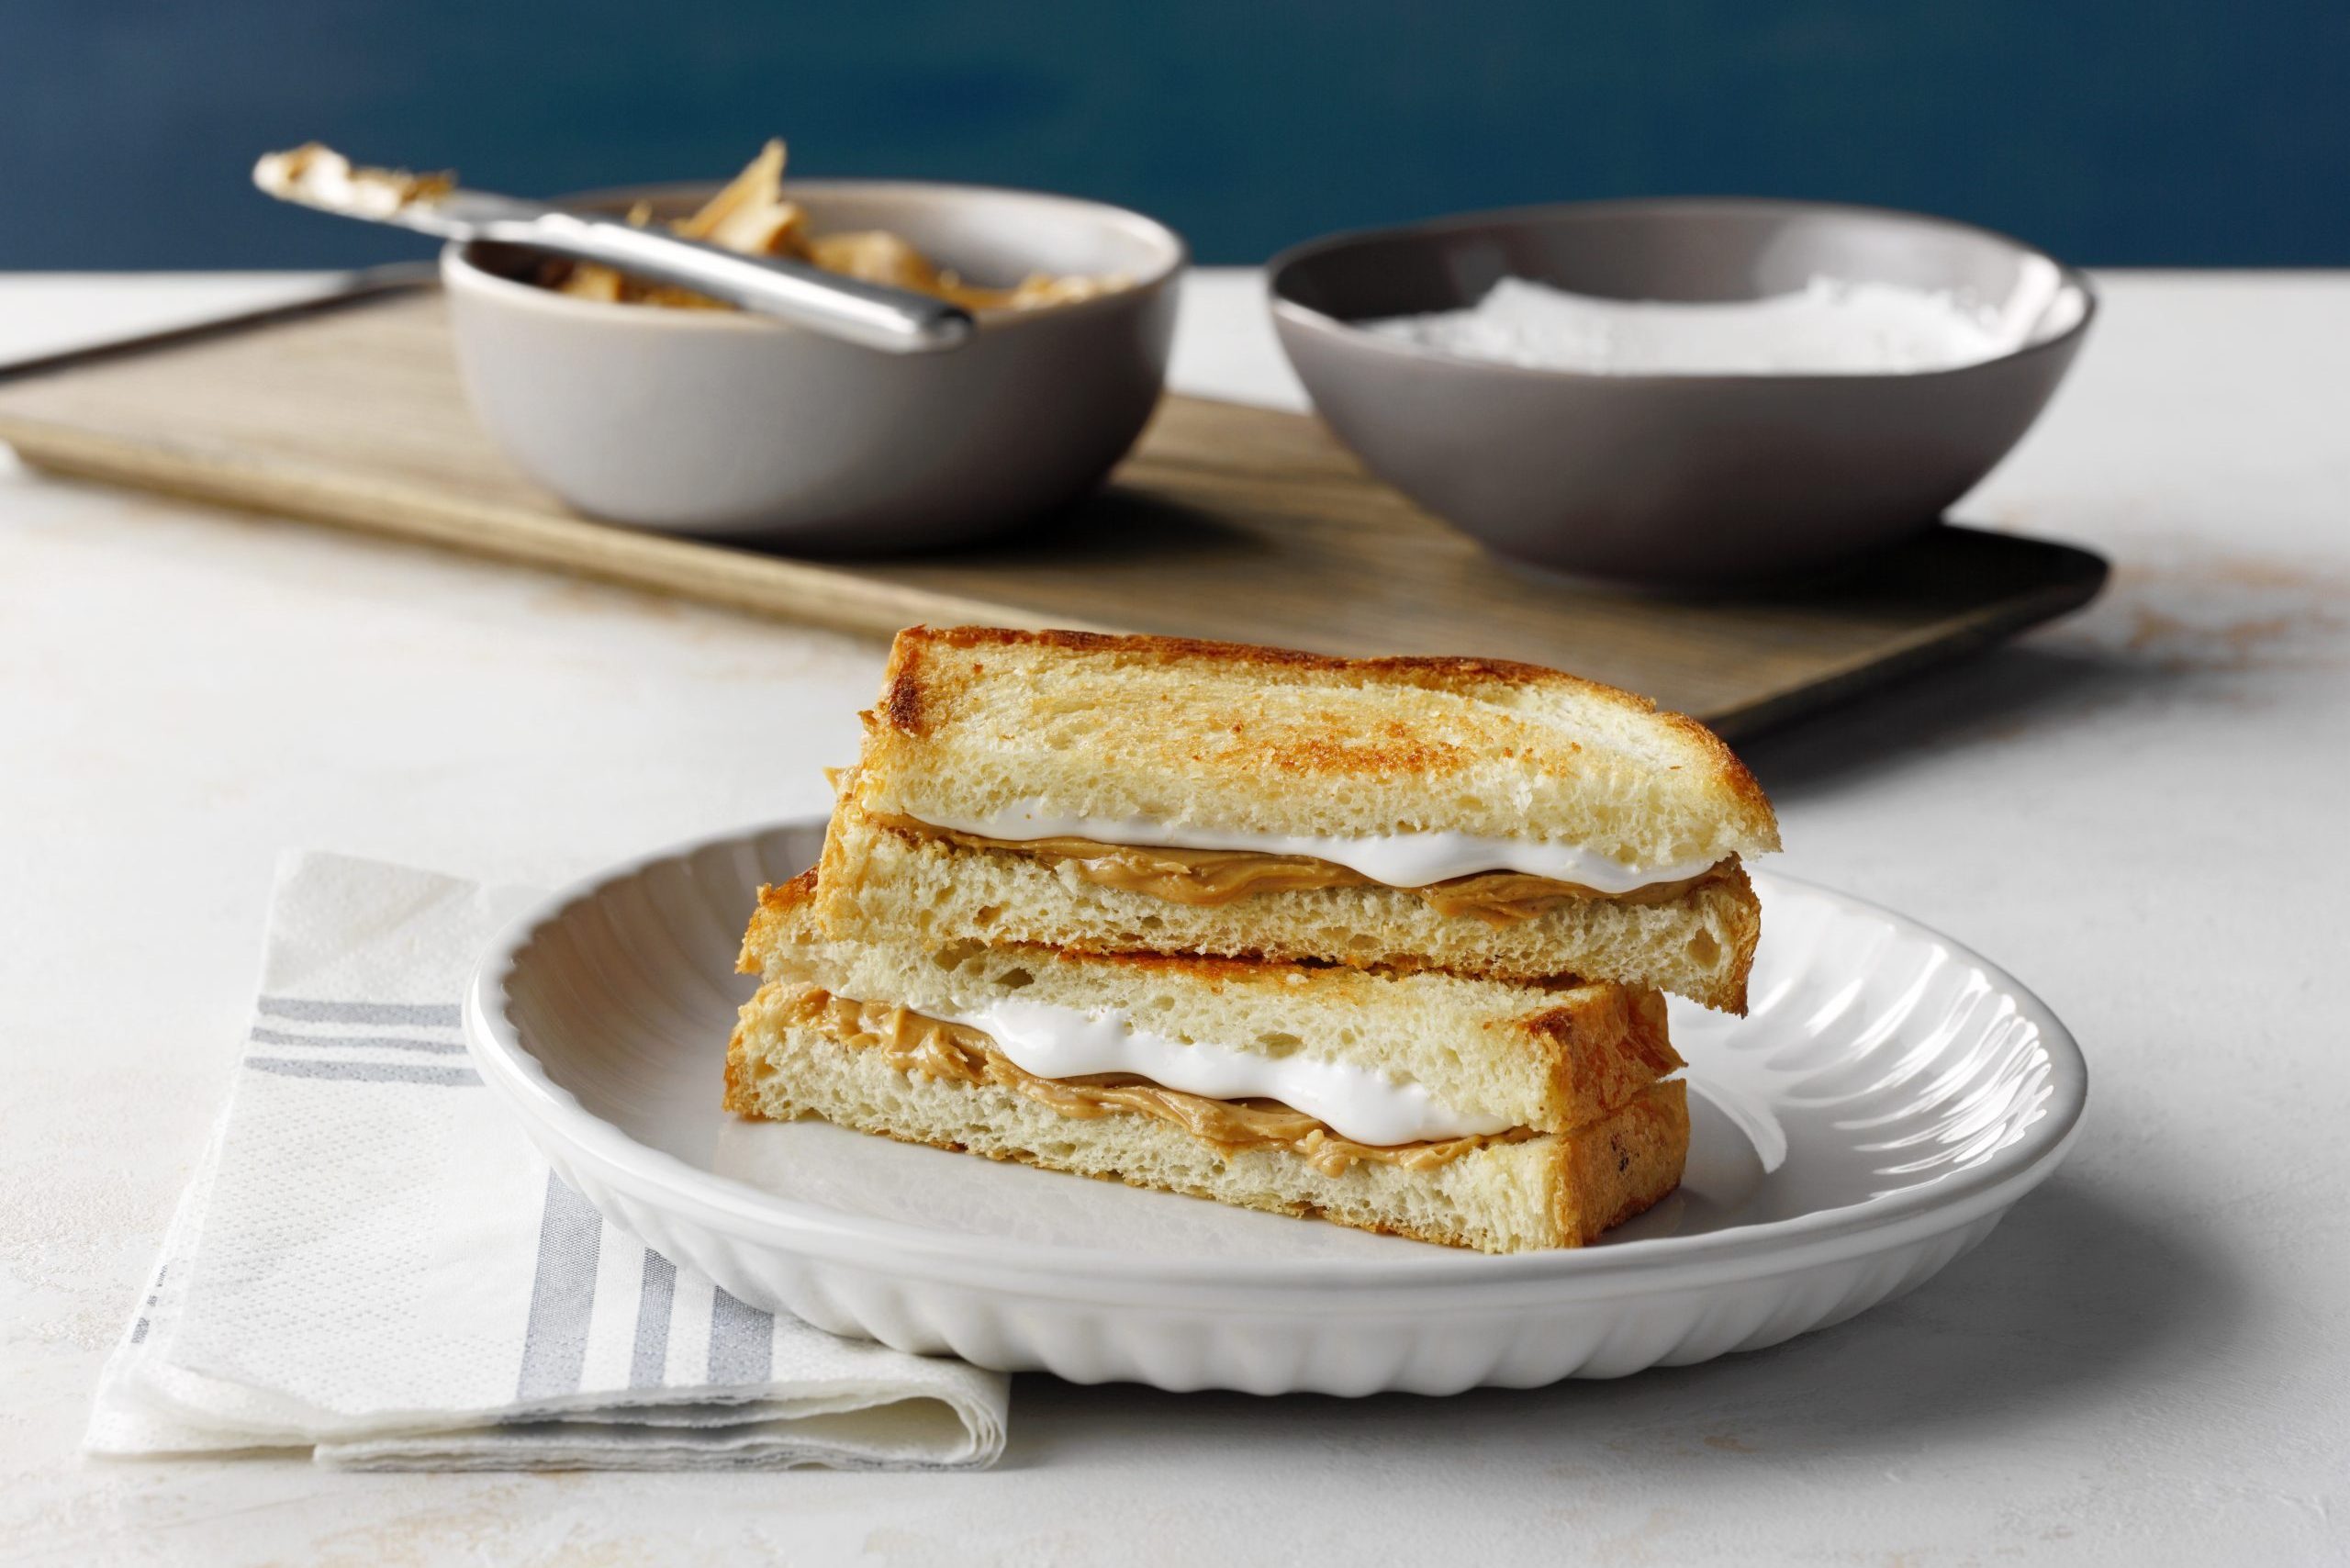 You’re Three Ingredients Away from One of the Best Sandwiches Ever: The Fluffernutter